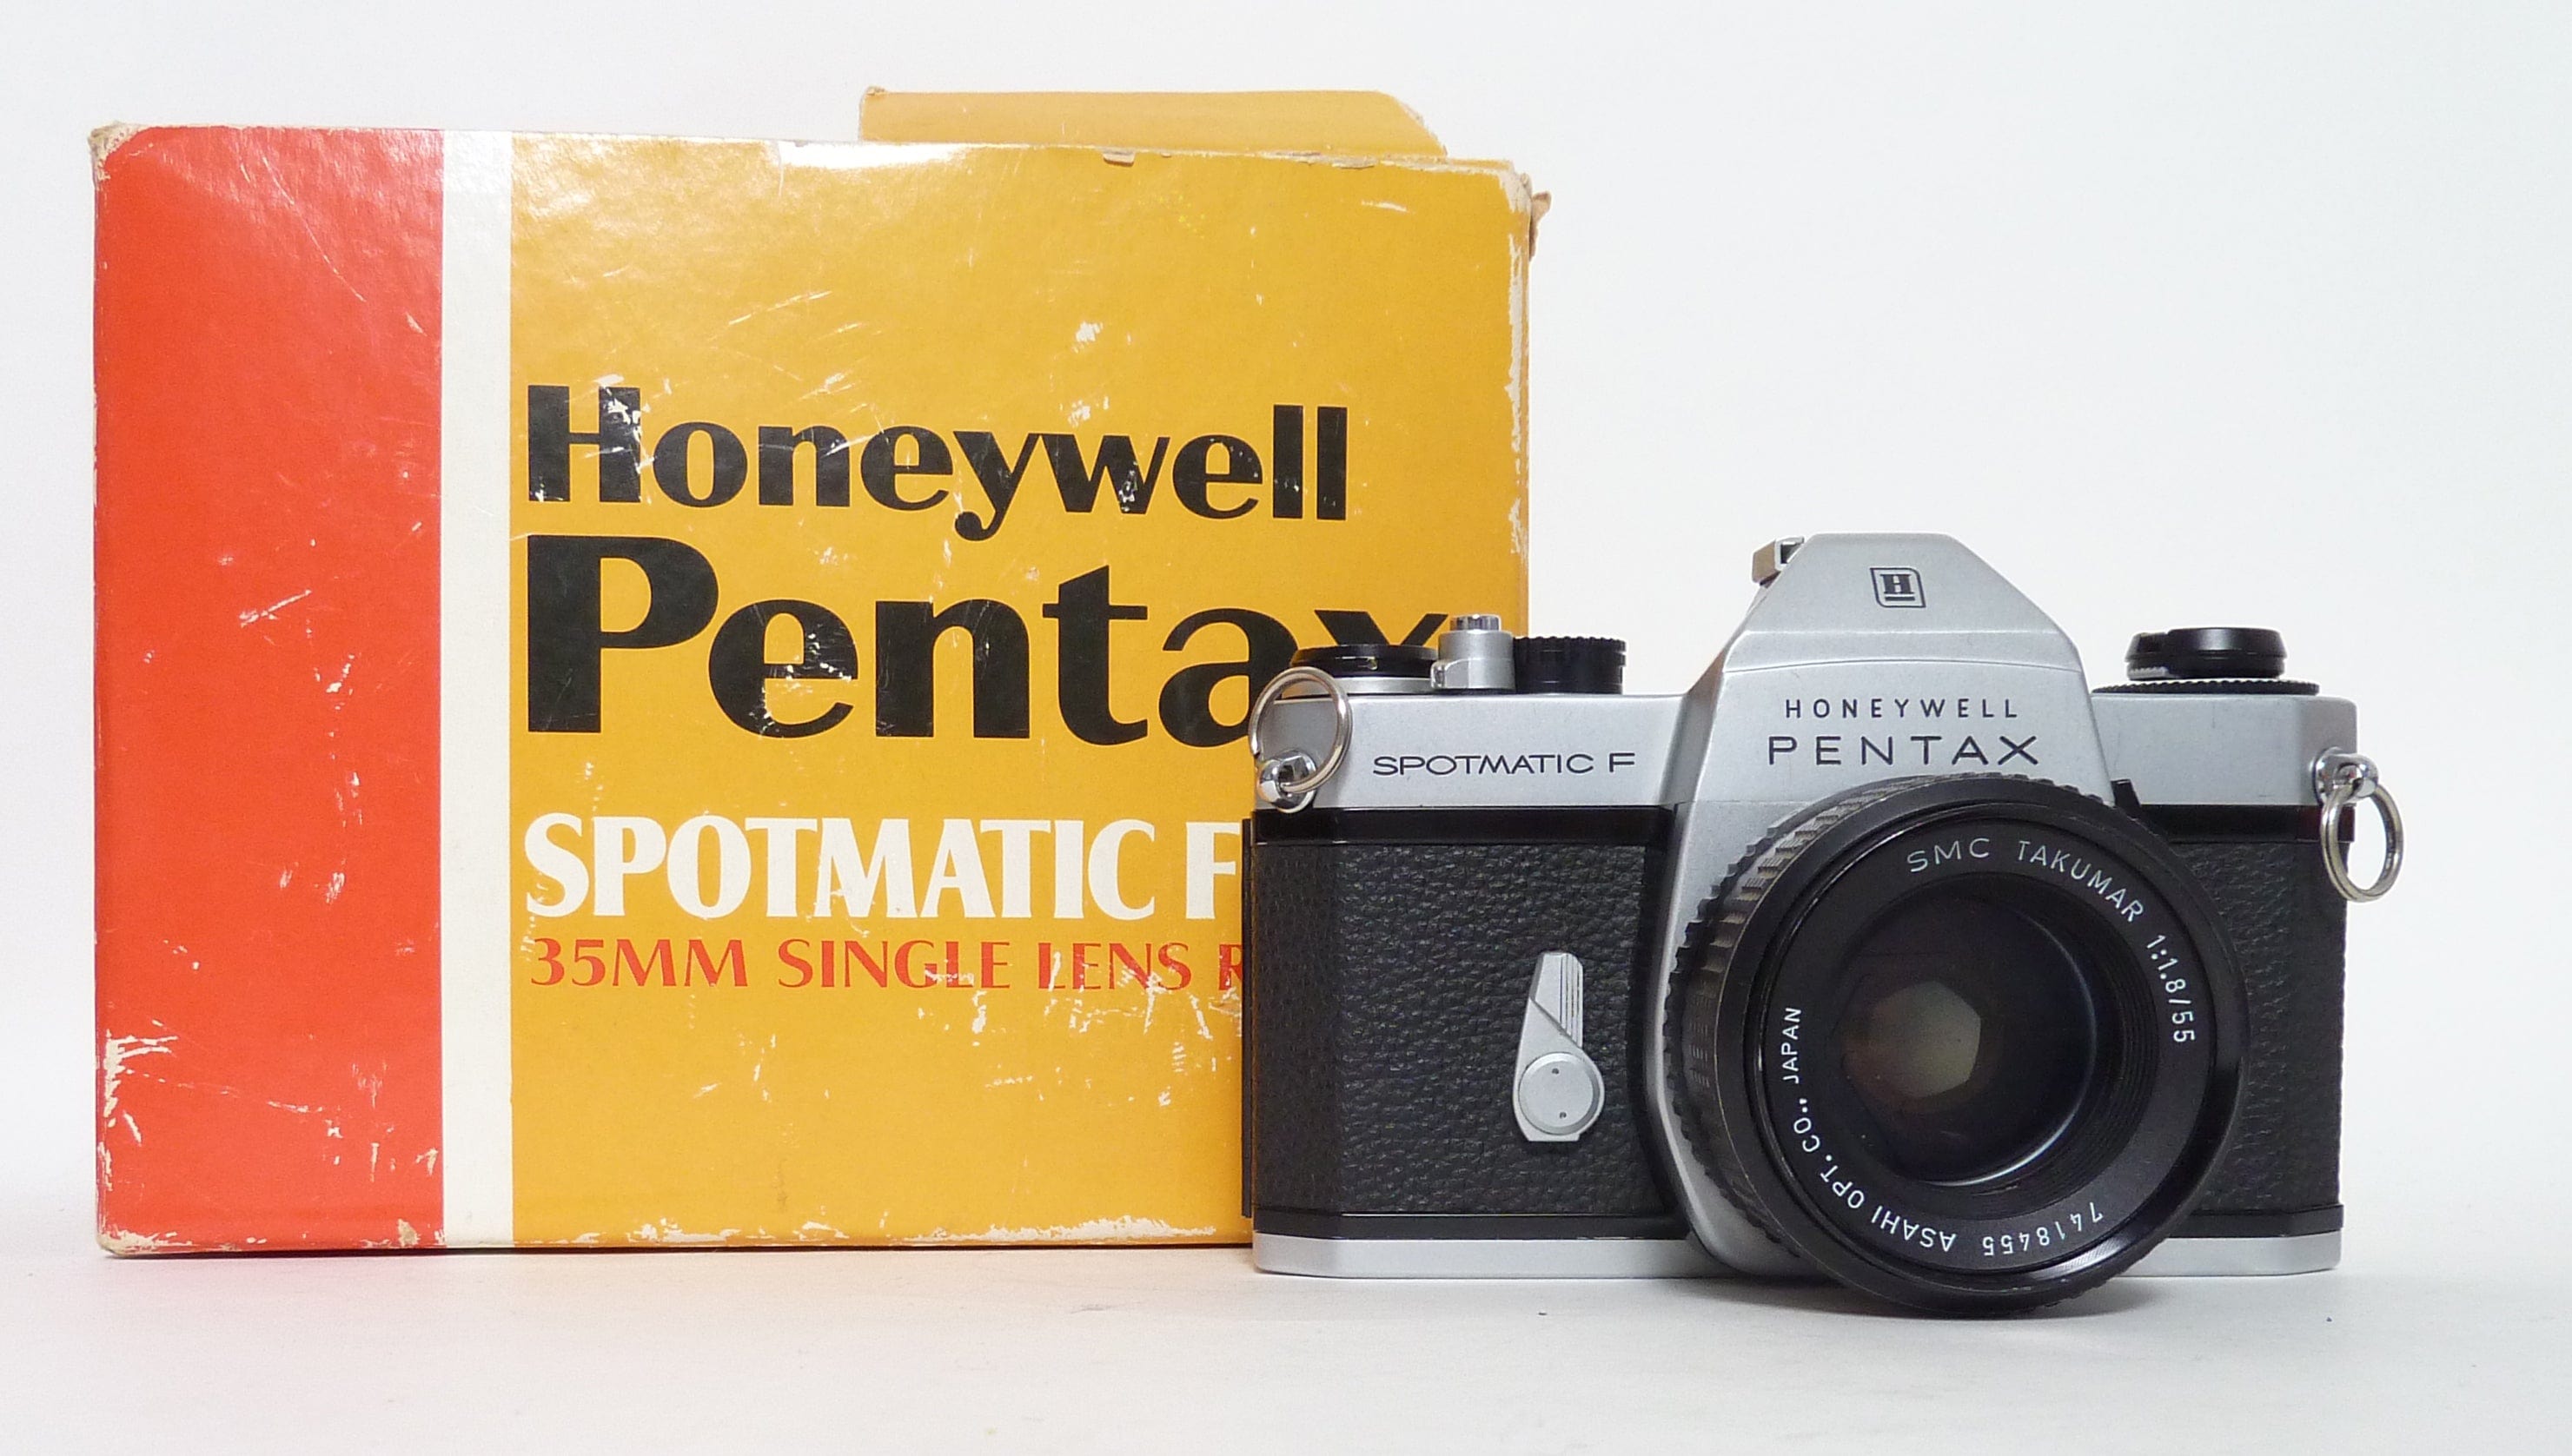 Pentax Spotmatic SP F with 55mm f1.8 Lens